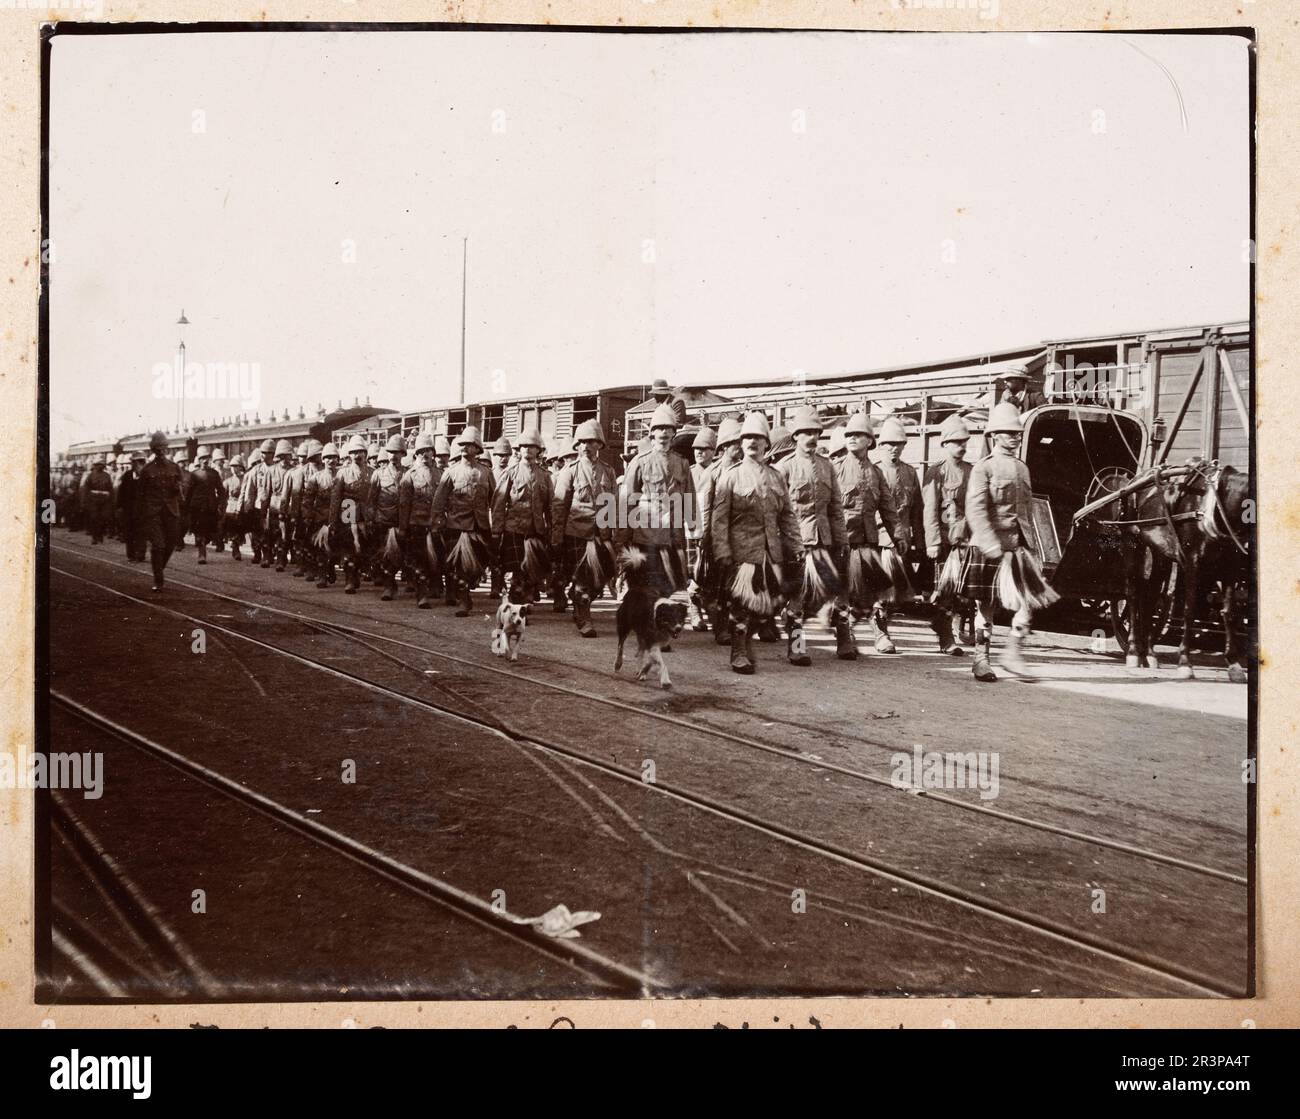 Fatique party of Gordon Highlanders soliders, marching by train, South Africa, Second Boer War, British Military History 1900, Vintage photograph Stock Photo